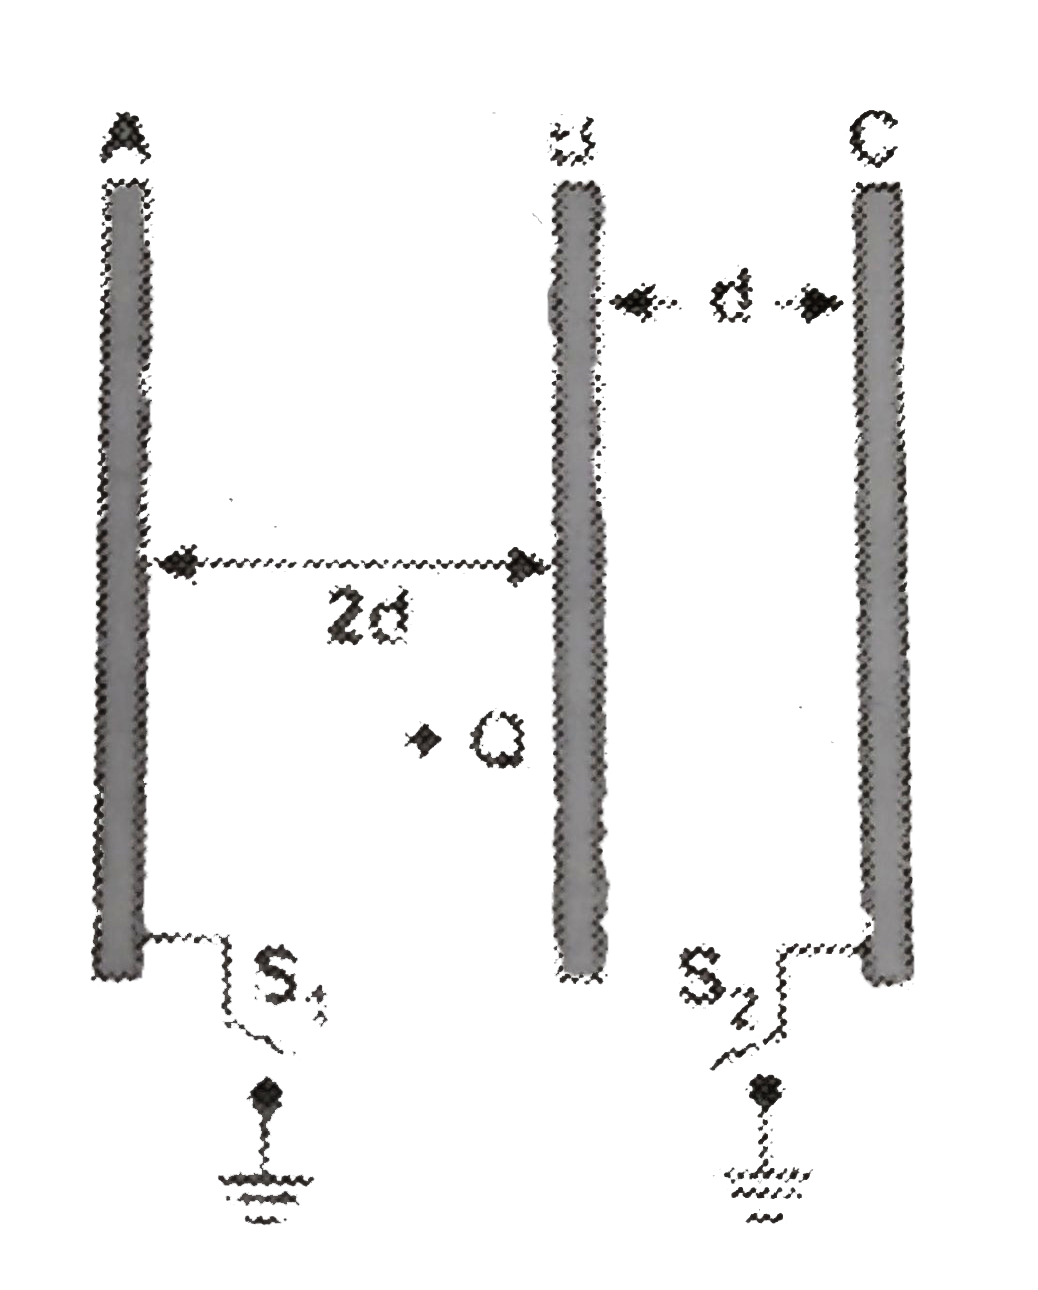 Three identical parallel conducting plates A, B and C are placed as shown. Switches S1 and S2 are open, and can connect A and C to earth when closed. +Q charges is given to B.